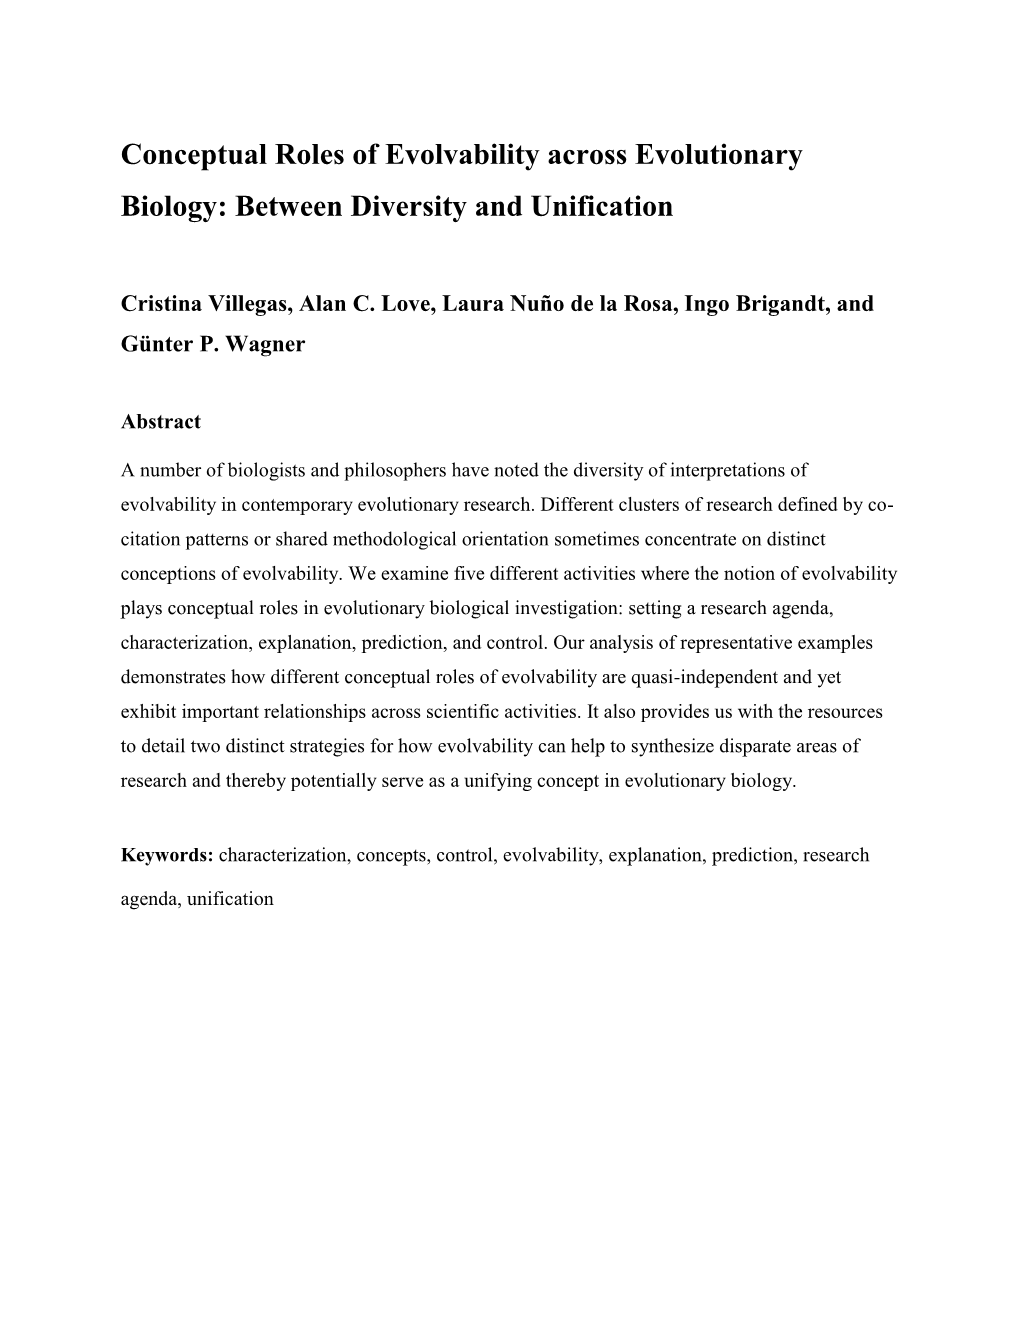 Conceptual Roles of Evolvability Across Evolutionary Biology: Between Diversity and Unification